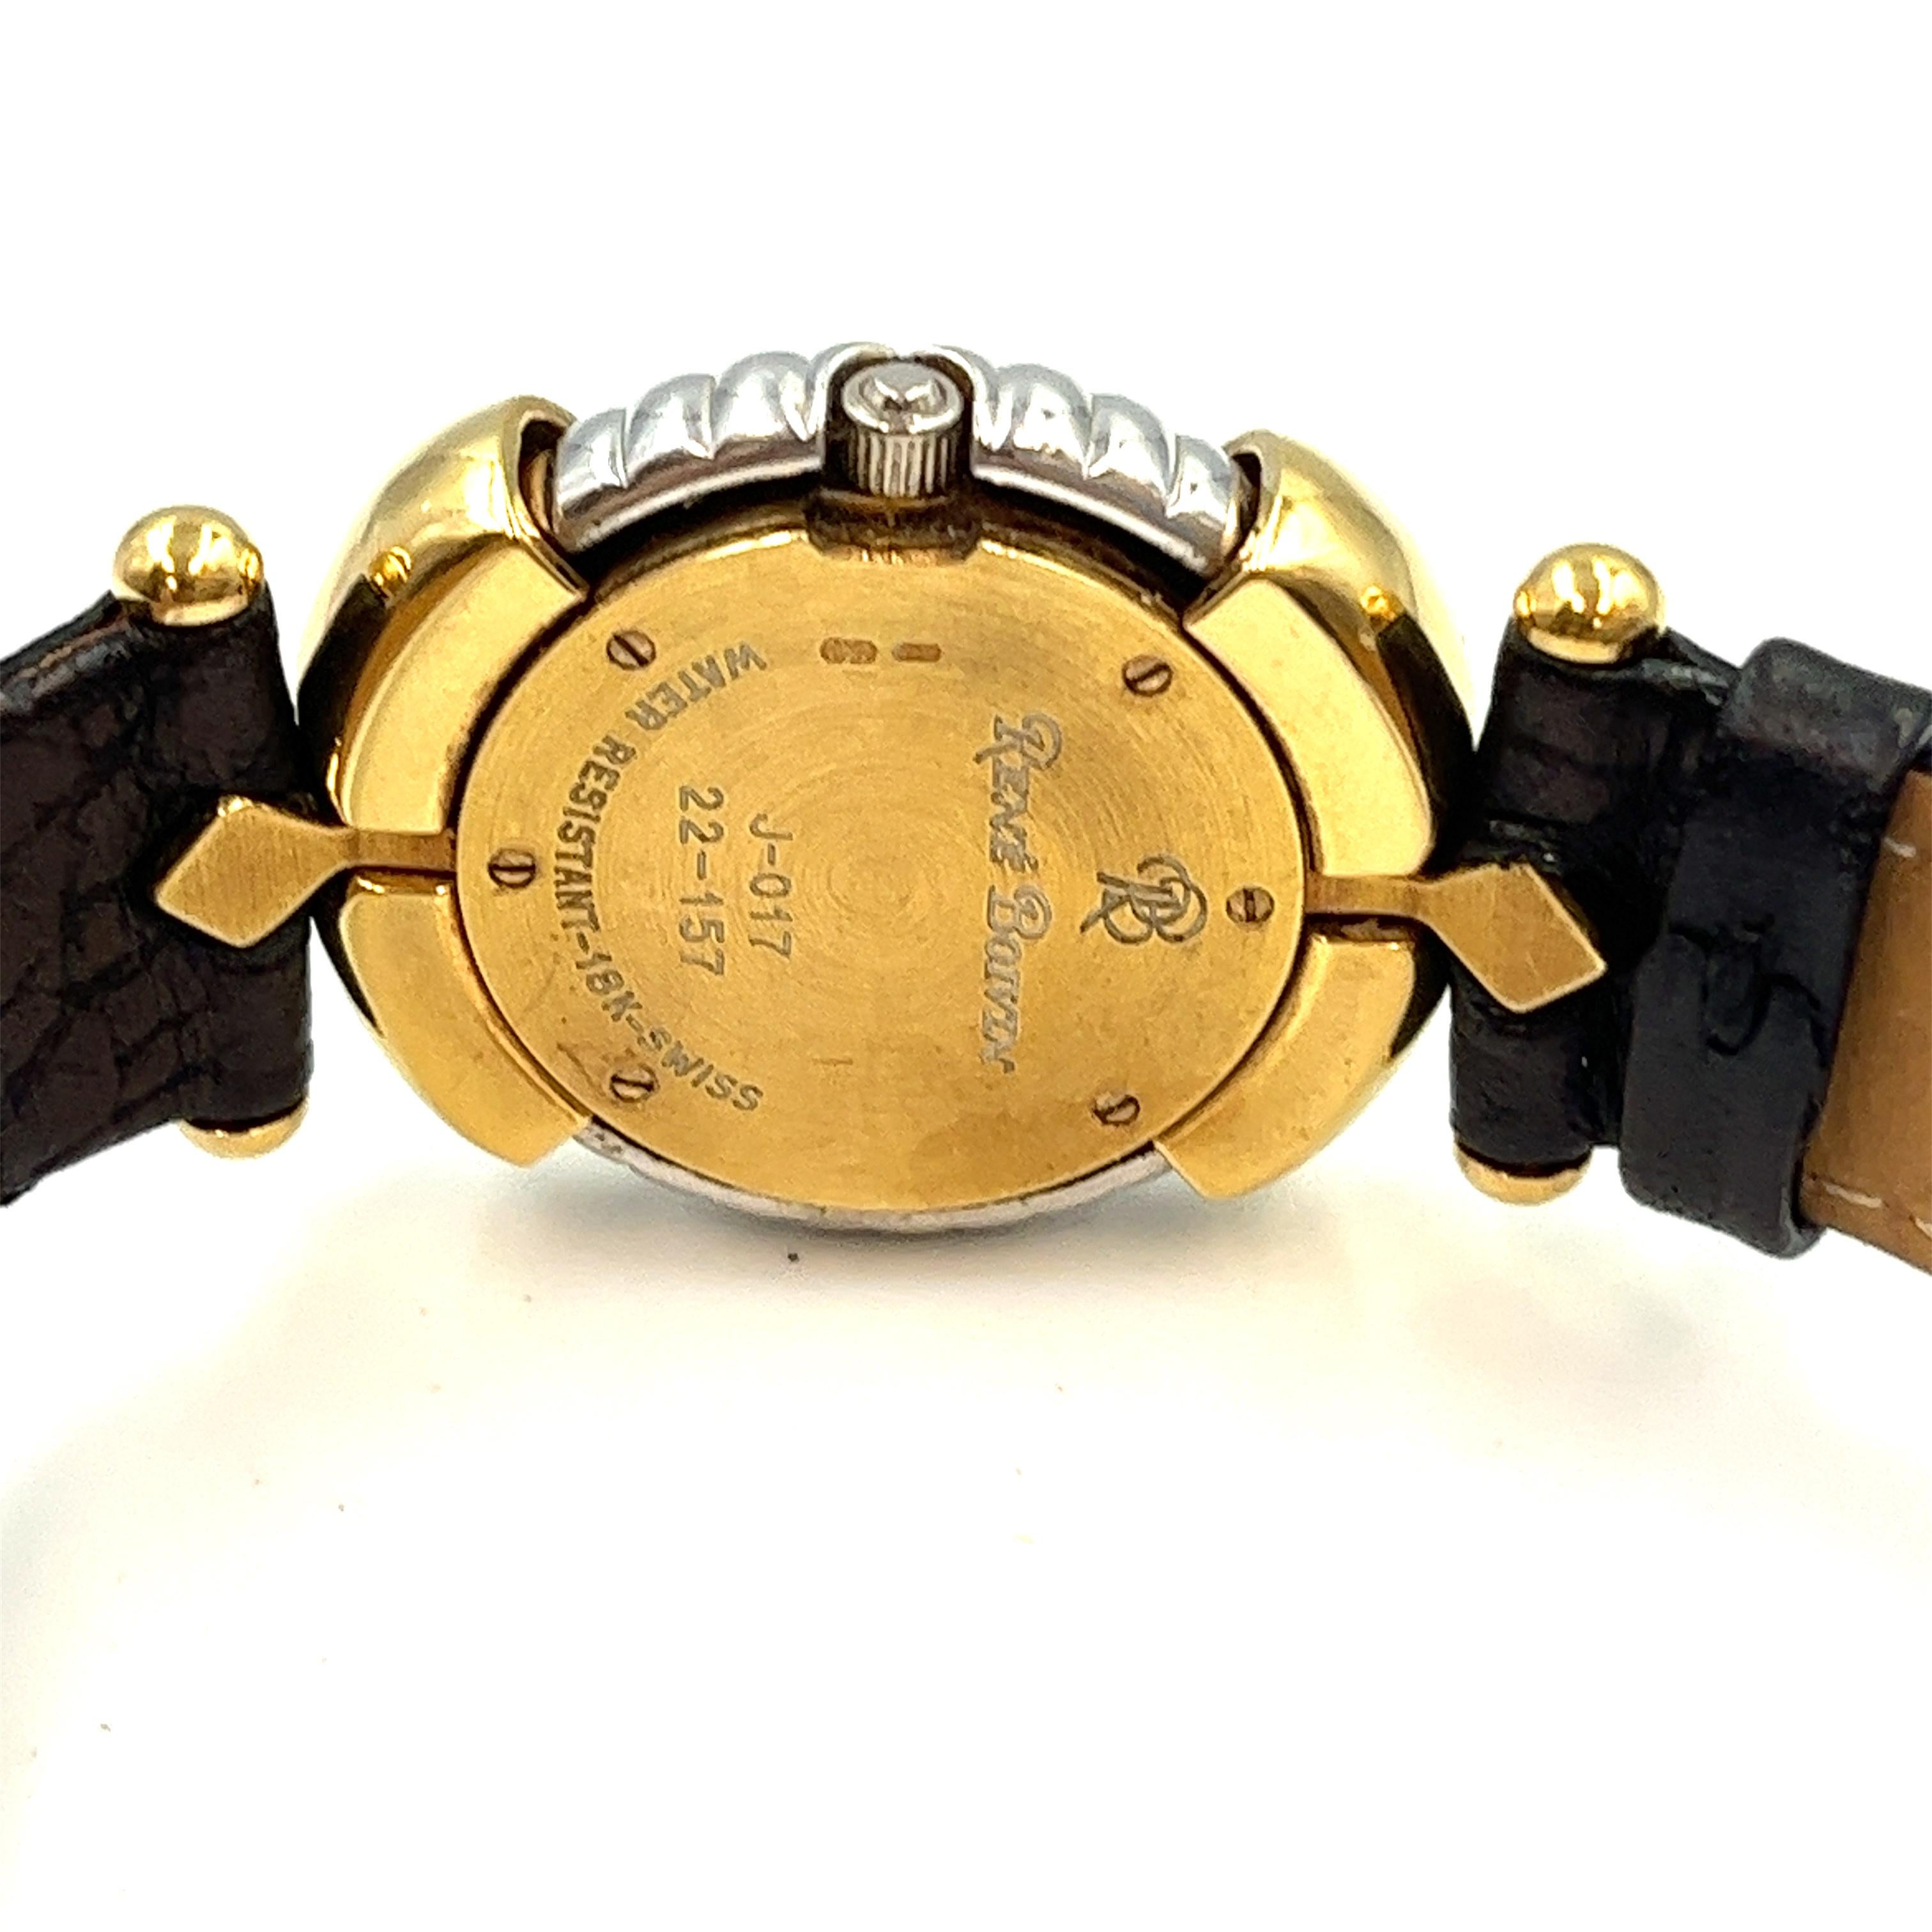  Rene Boivin Chrysalis with Yellow Gold Case in Very Good Condition For Sale 1